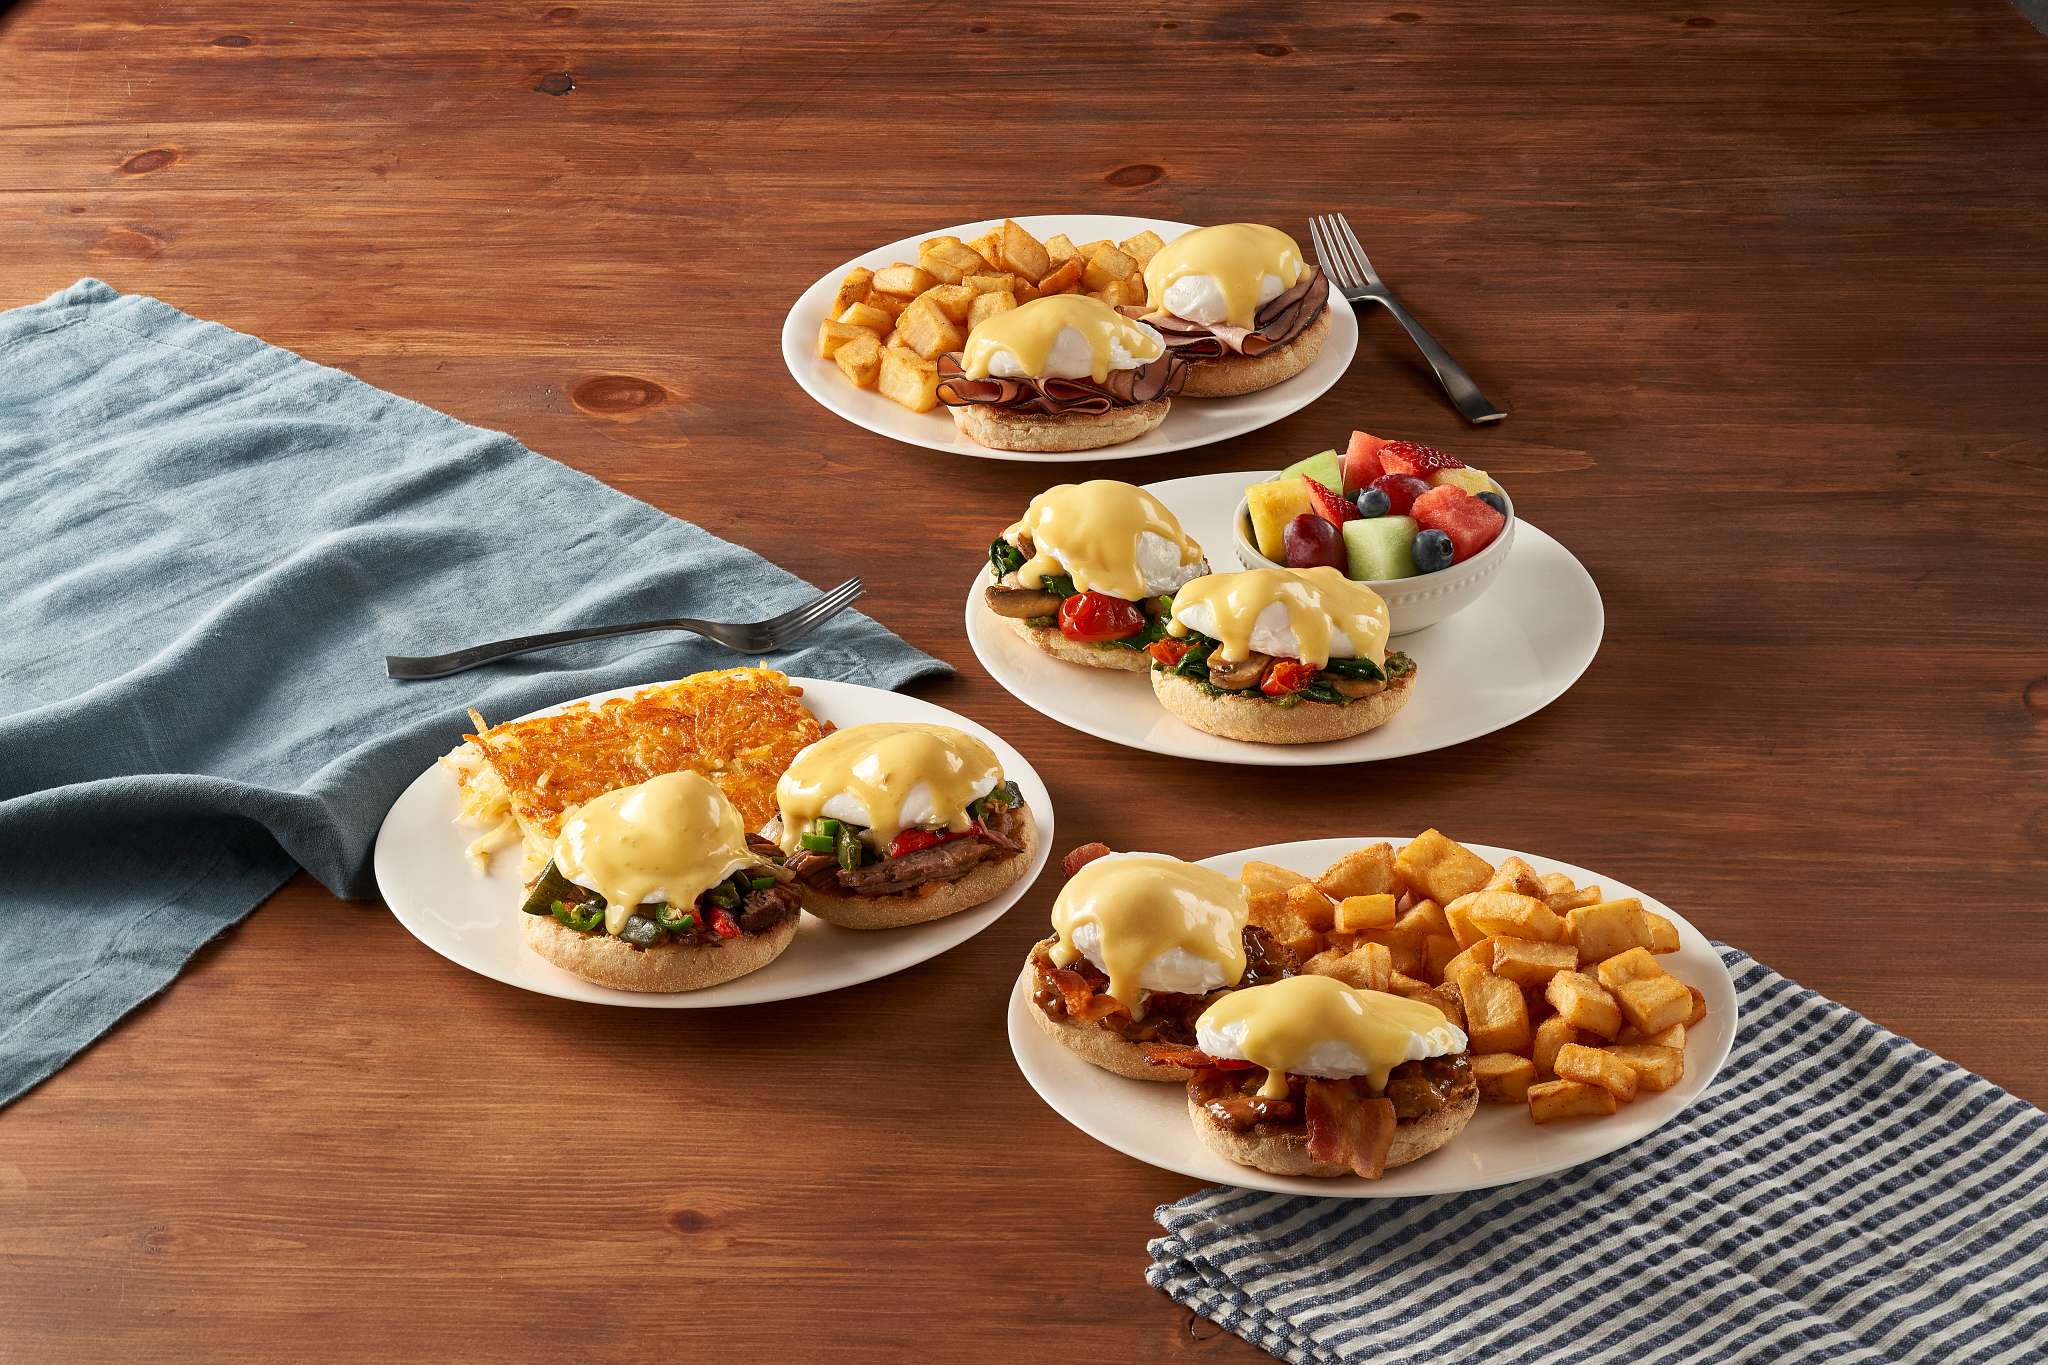 IHOP® Introduces Largest Menu Evolution To-Date with New Craveable and  Flavorful Lineup Made for Any Time of Day